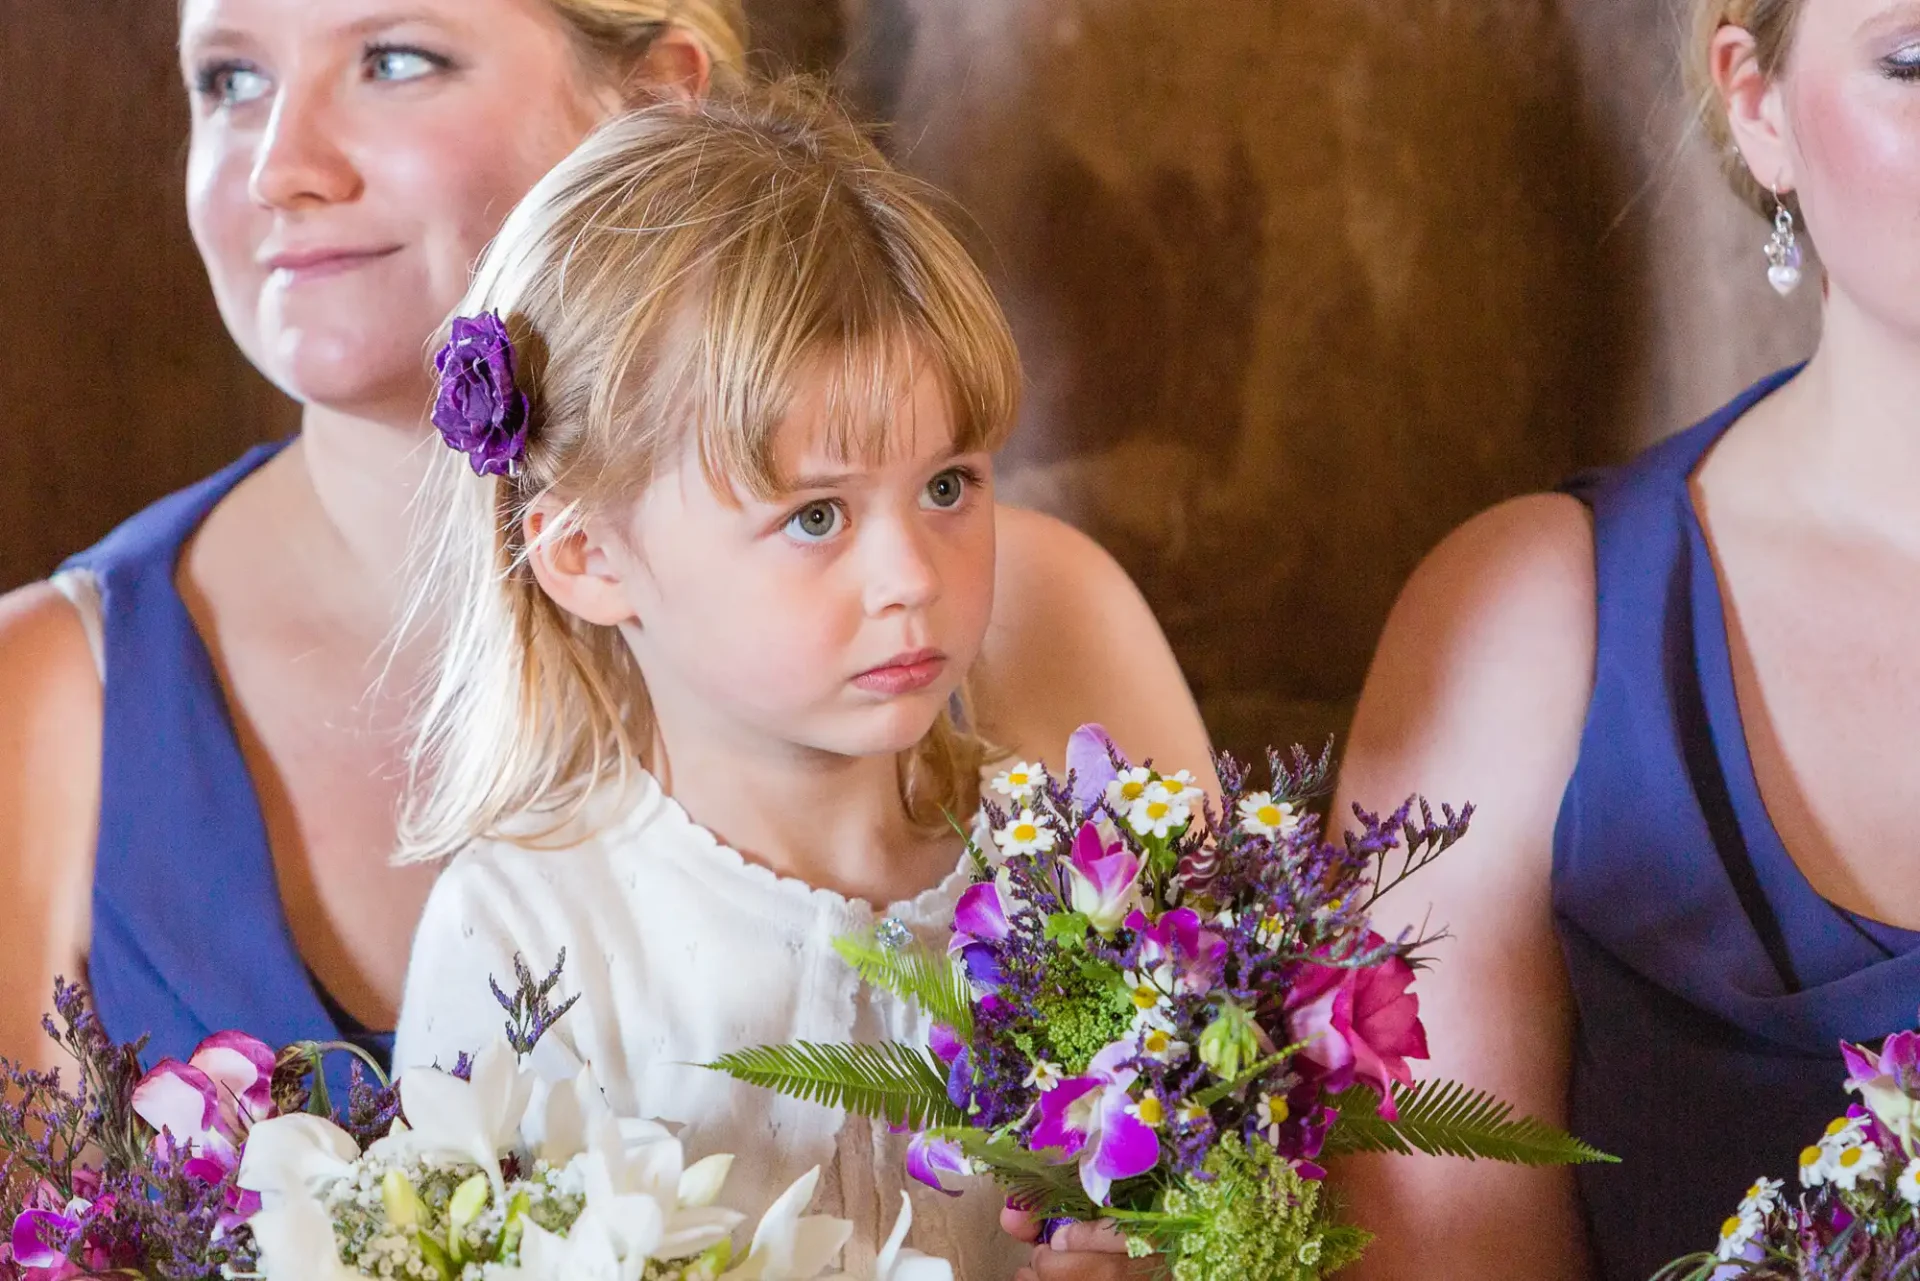 A young girl with a white dress and a purple flower in her hair holds a bouquet, sitting beside two women in blue dresses at a formal event.